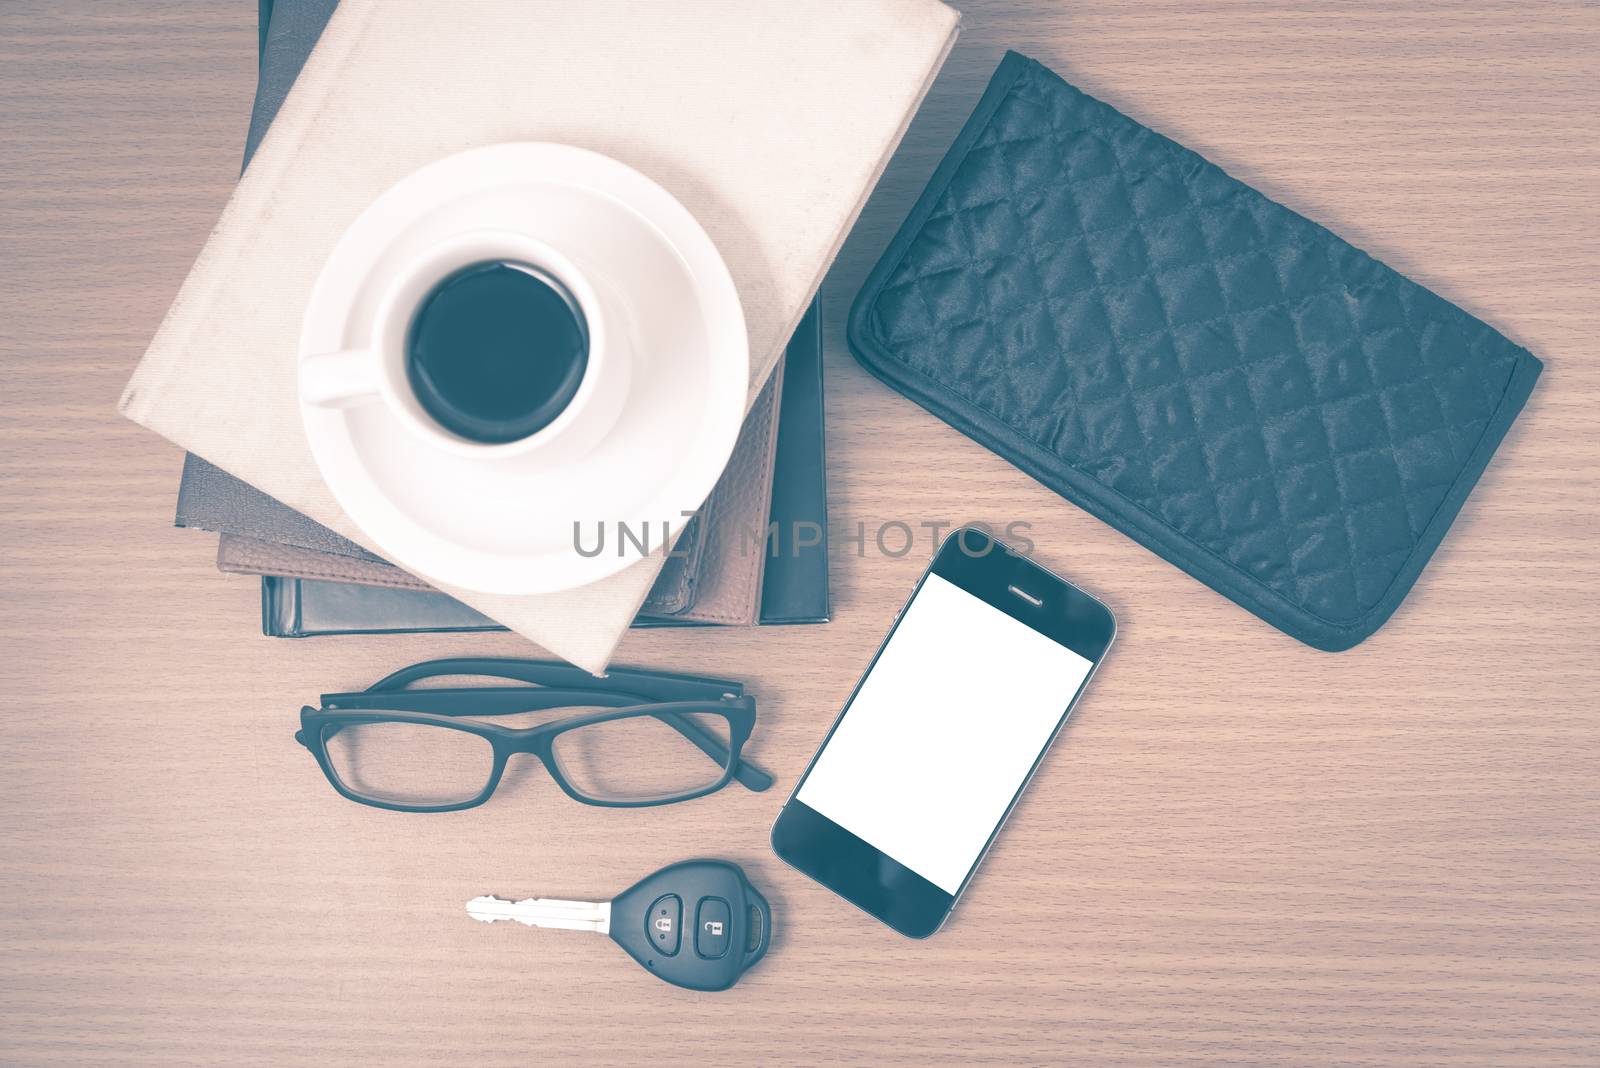 coffee and phone with stack of book,car key,eyeglasses and wallet on wood background vintage style